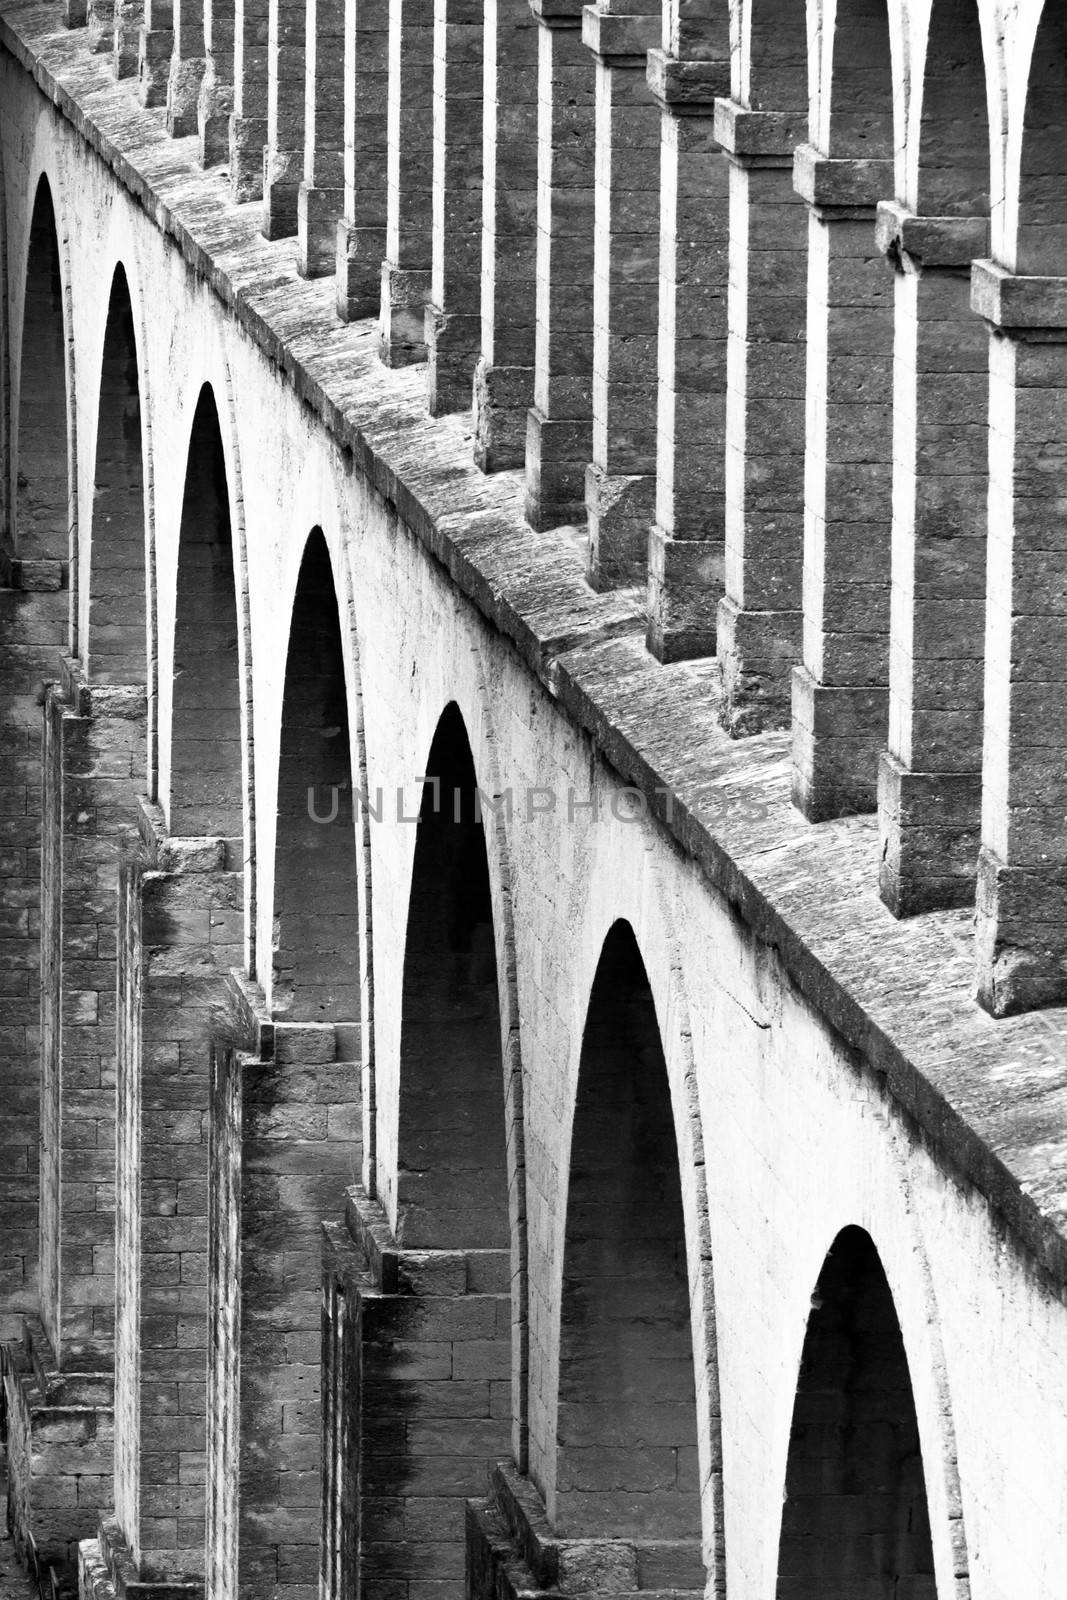 Architectural detail from the Saint Clement Aqueduct, Montpelier, France, shot in black and white.